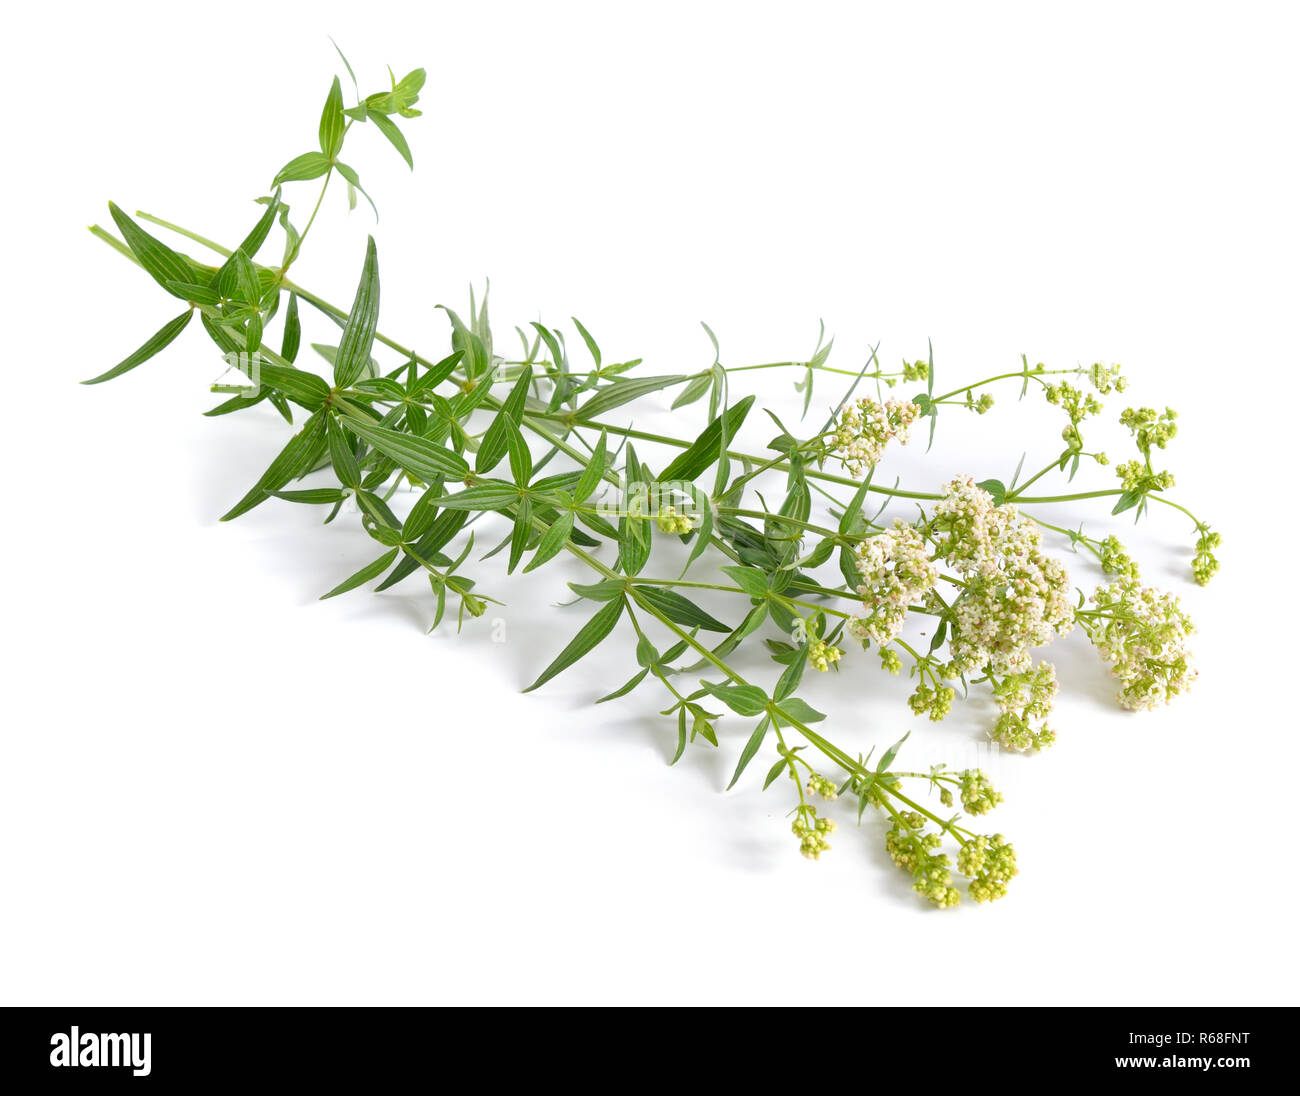 Galium boreale or northern bedstraw. Isoated on white Stock Photo